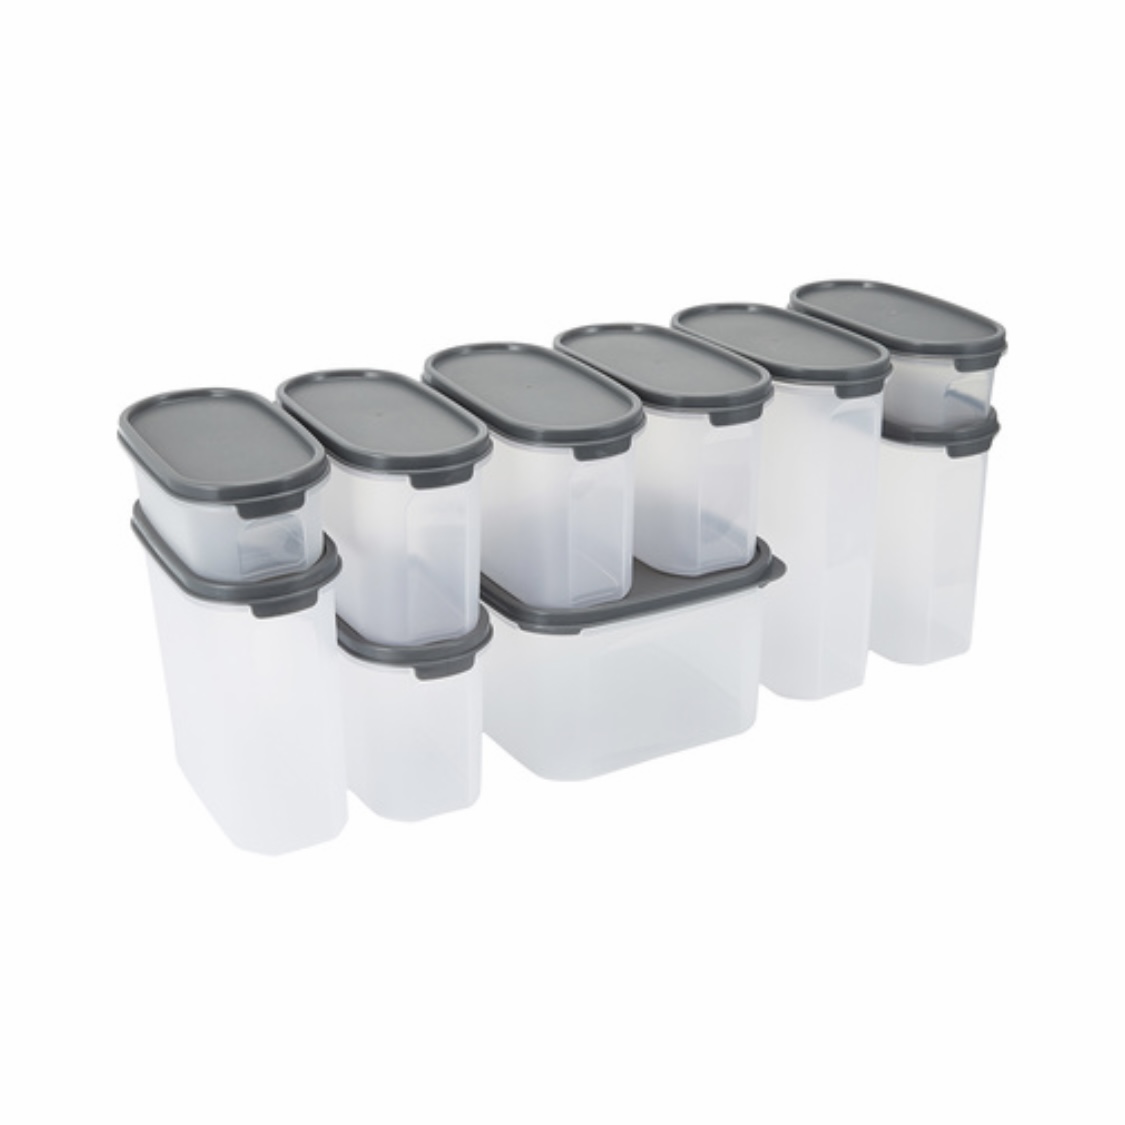 (Kmart) Food Container Set